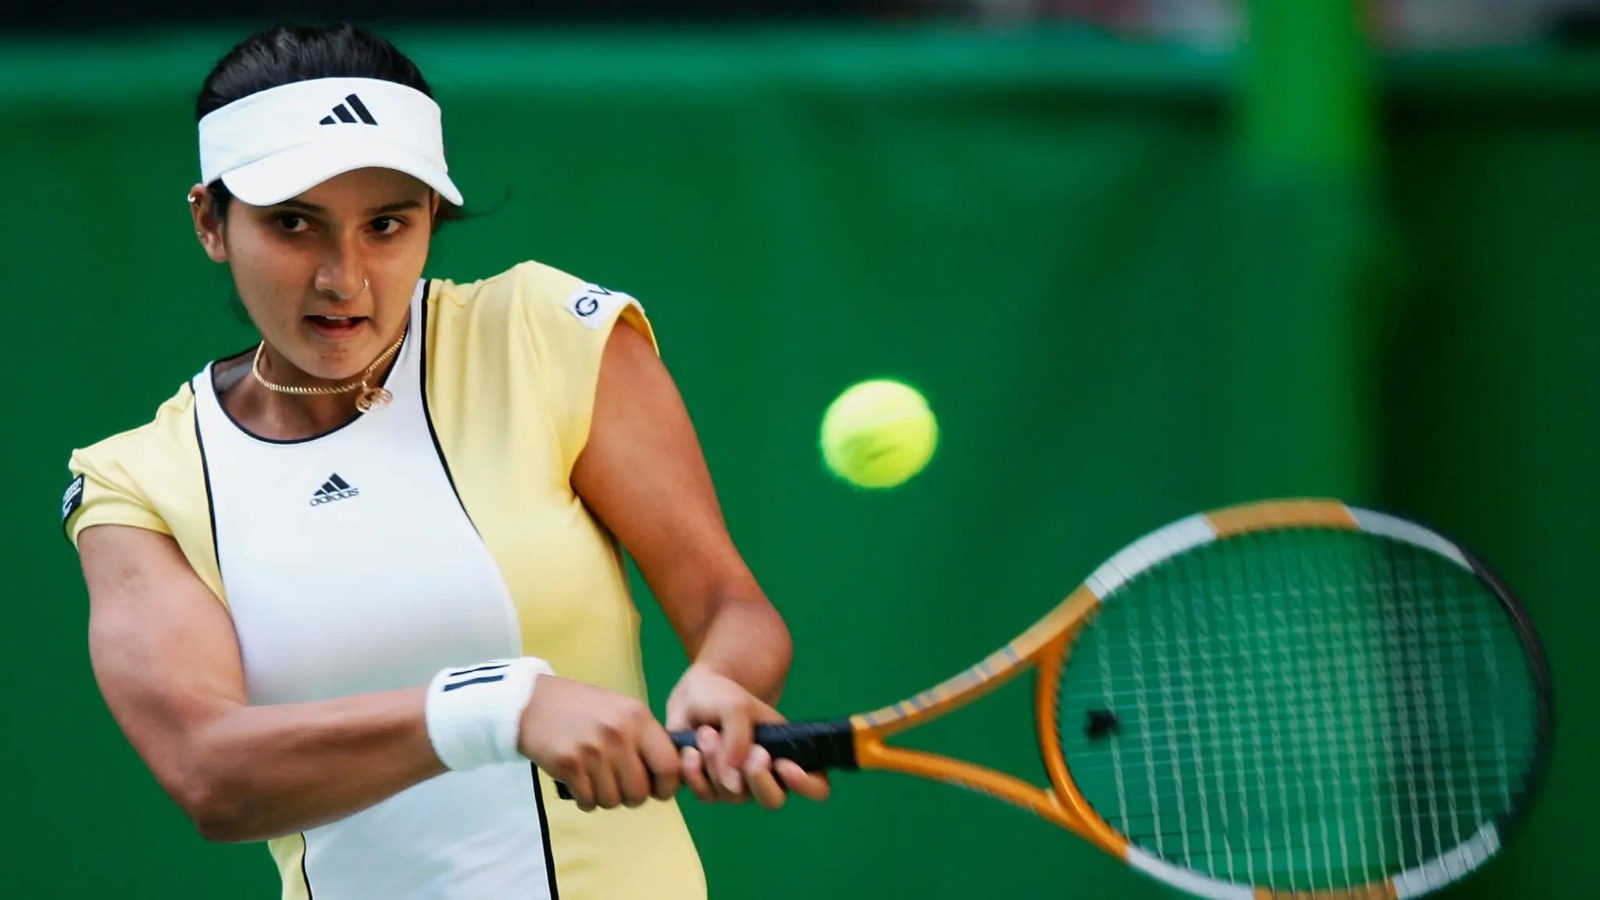 Sania Mirza gets emotion during emotional farewell speech at AO